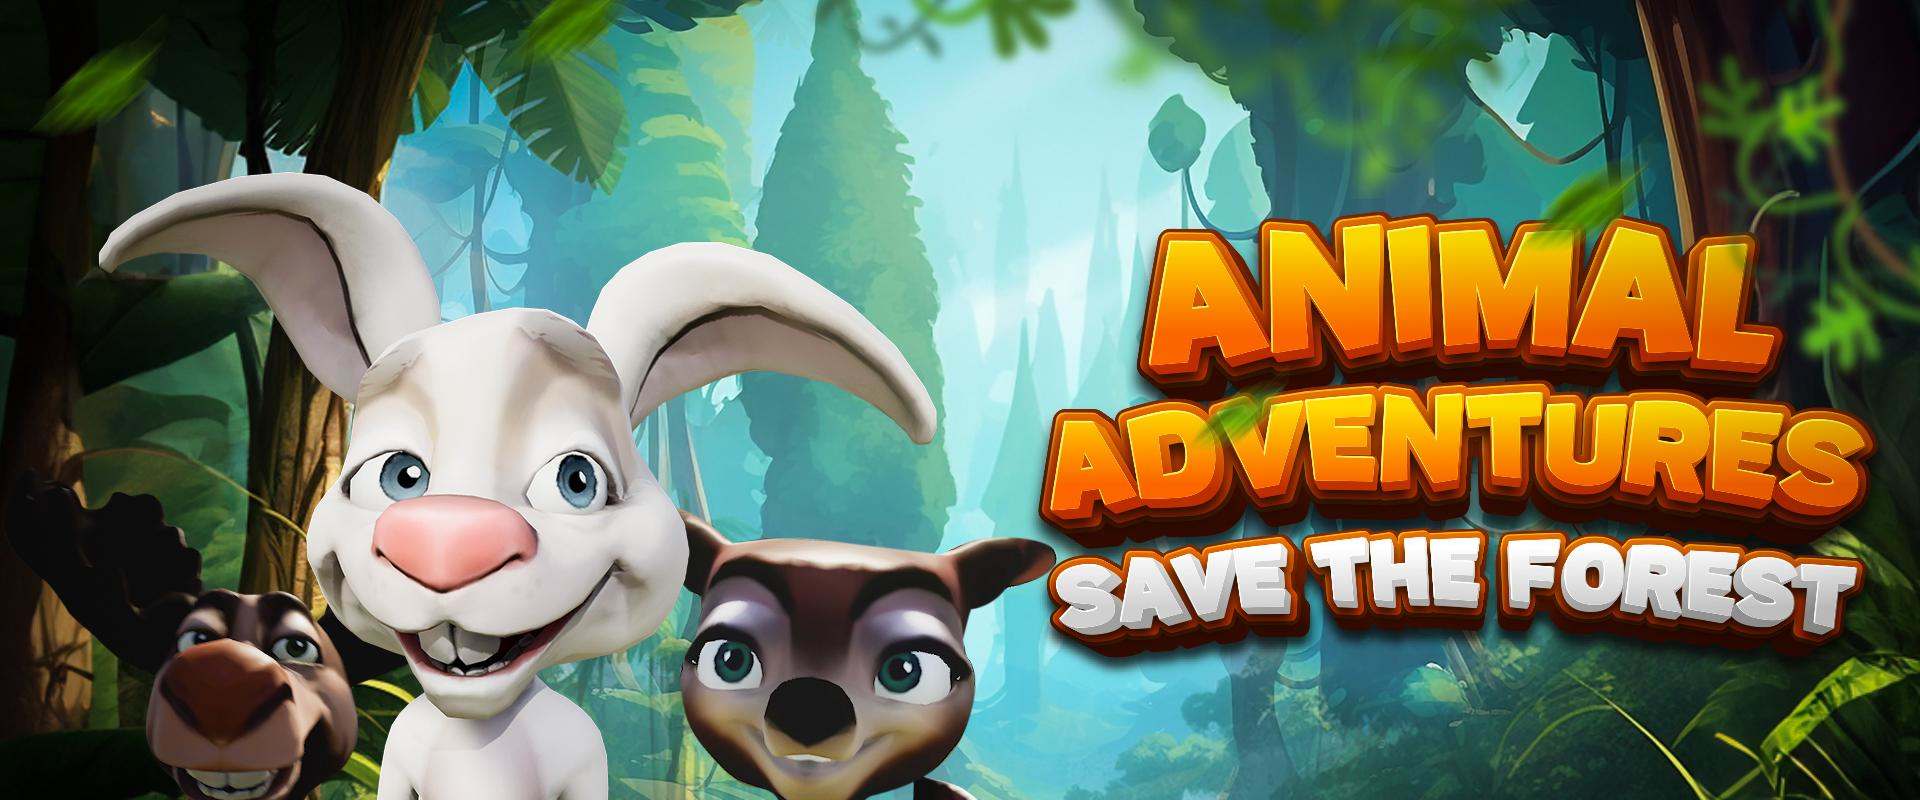 Animal Adventures: Save The Forest background 1